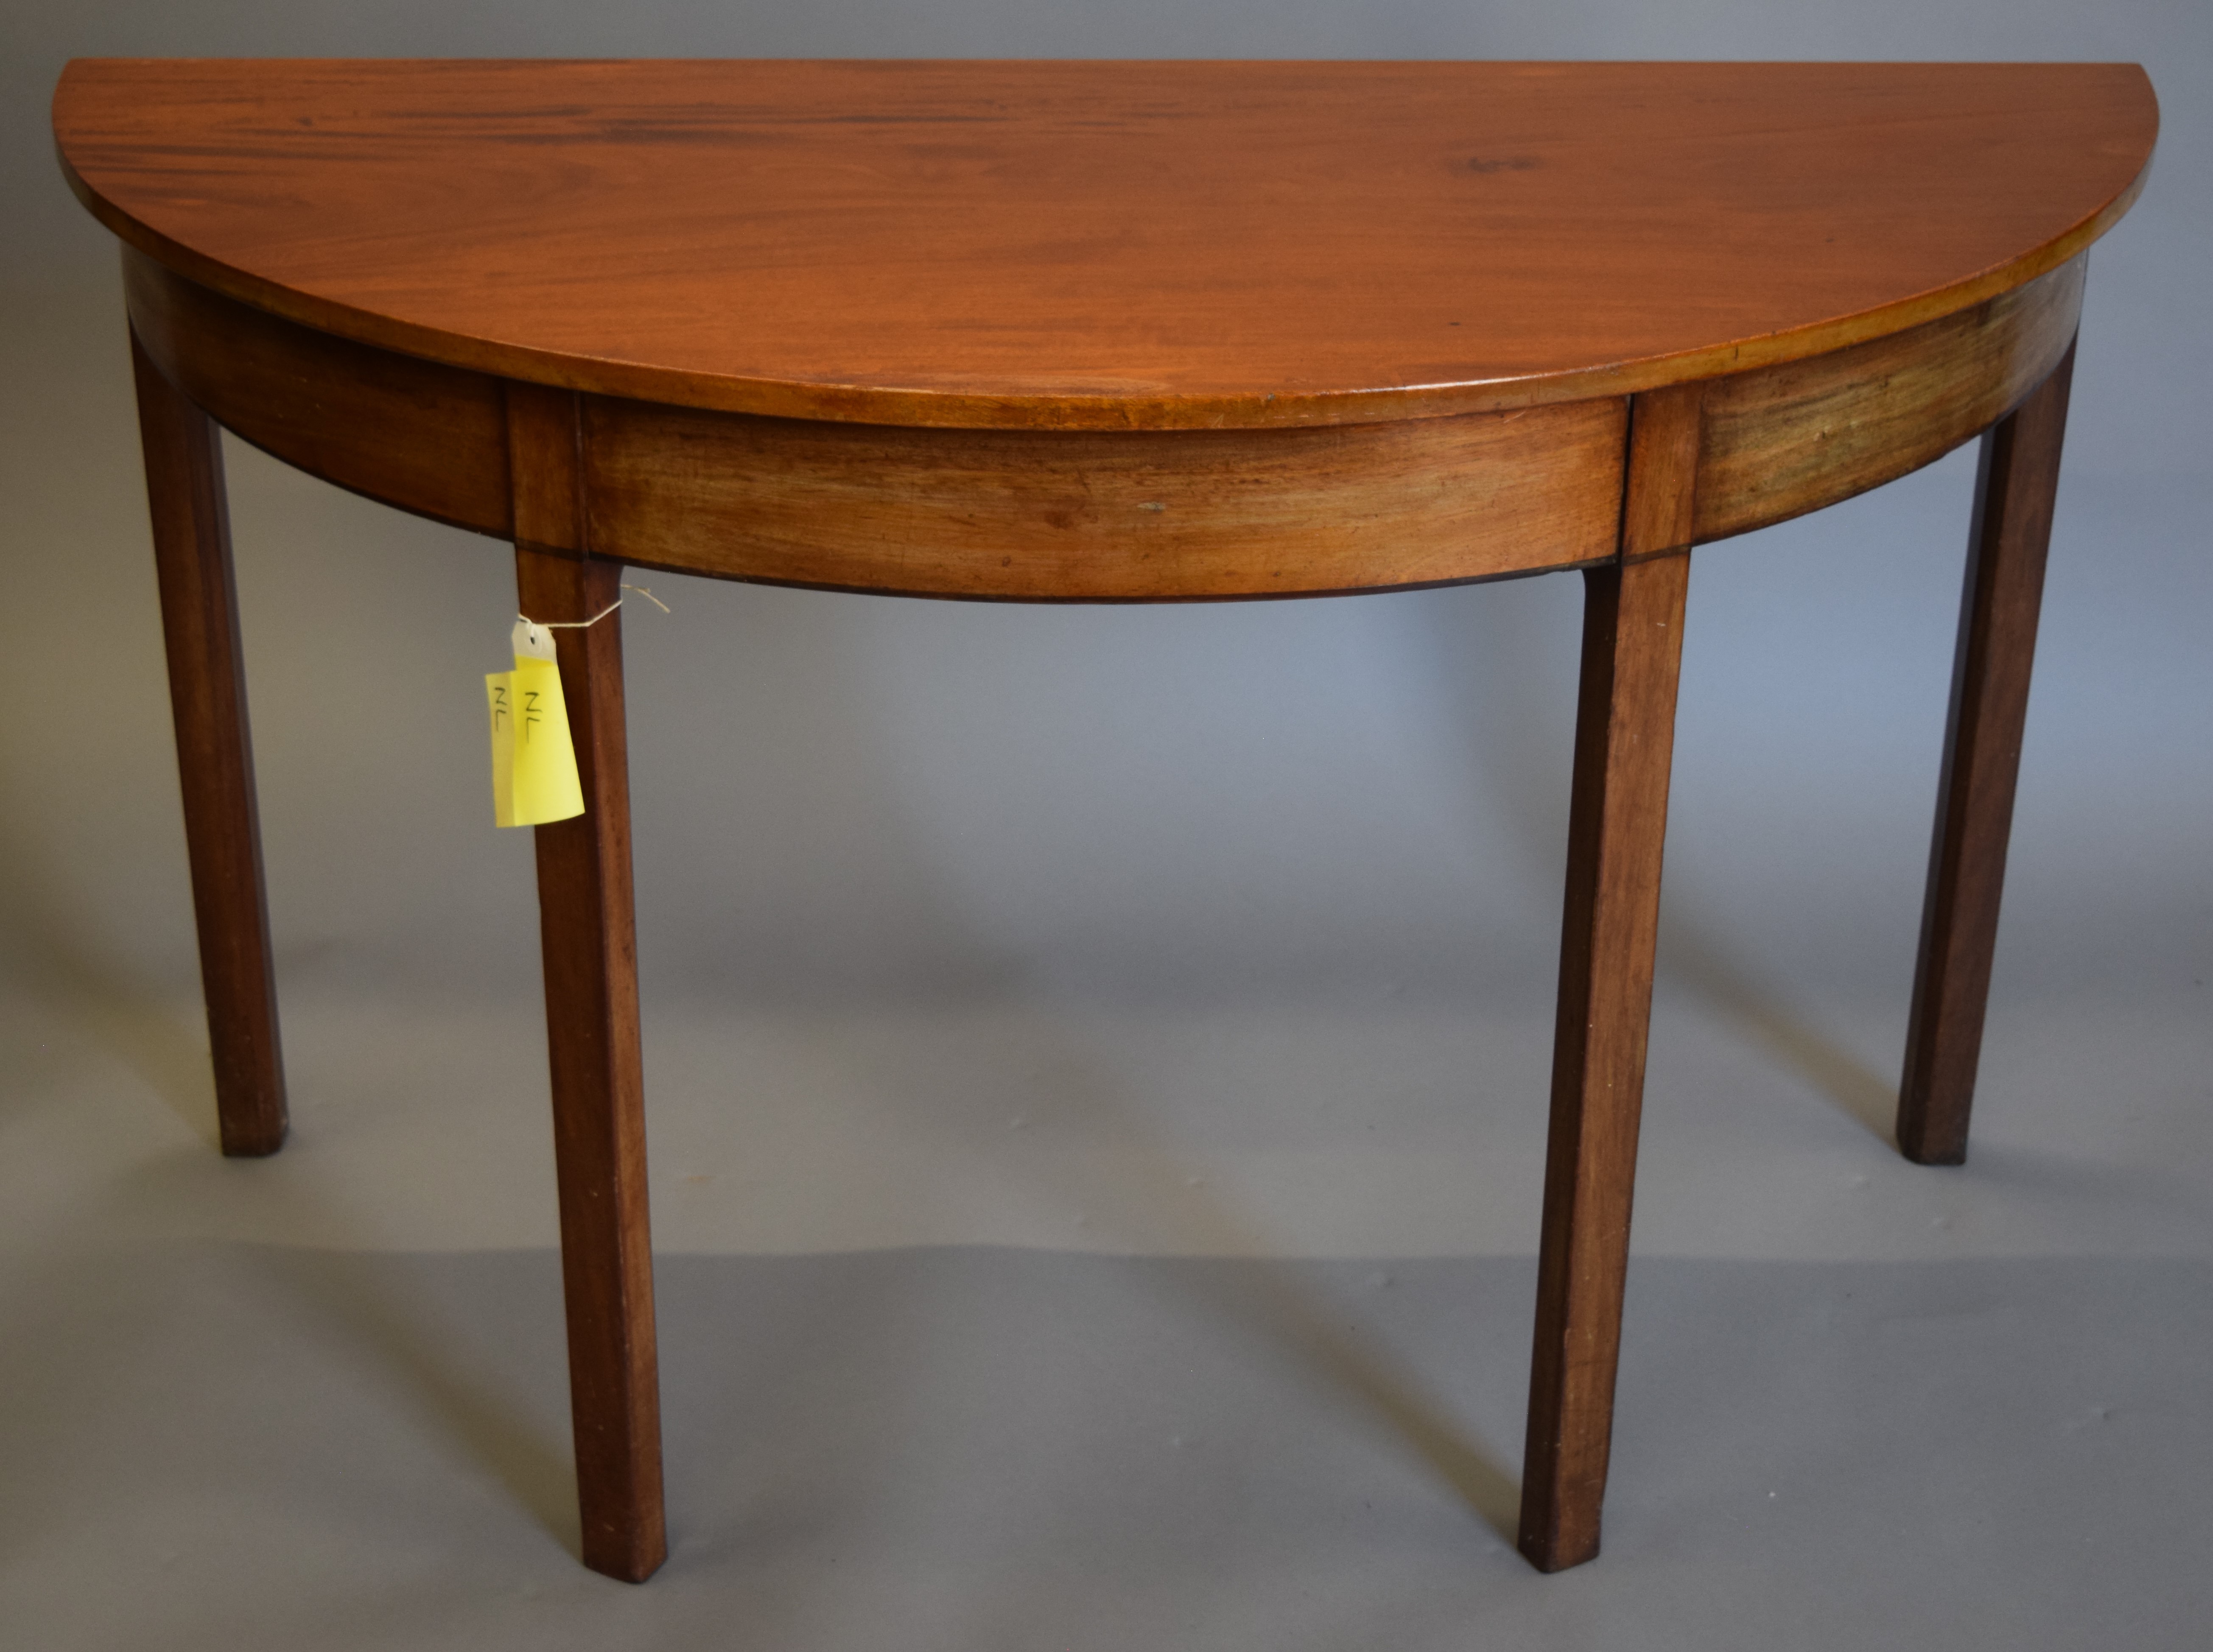 Two 19th century mahogany demi-lune tables. Each 121 cm wide, 72 cm high. - Image 2 of 6